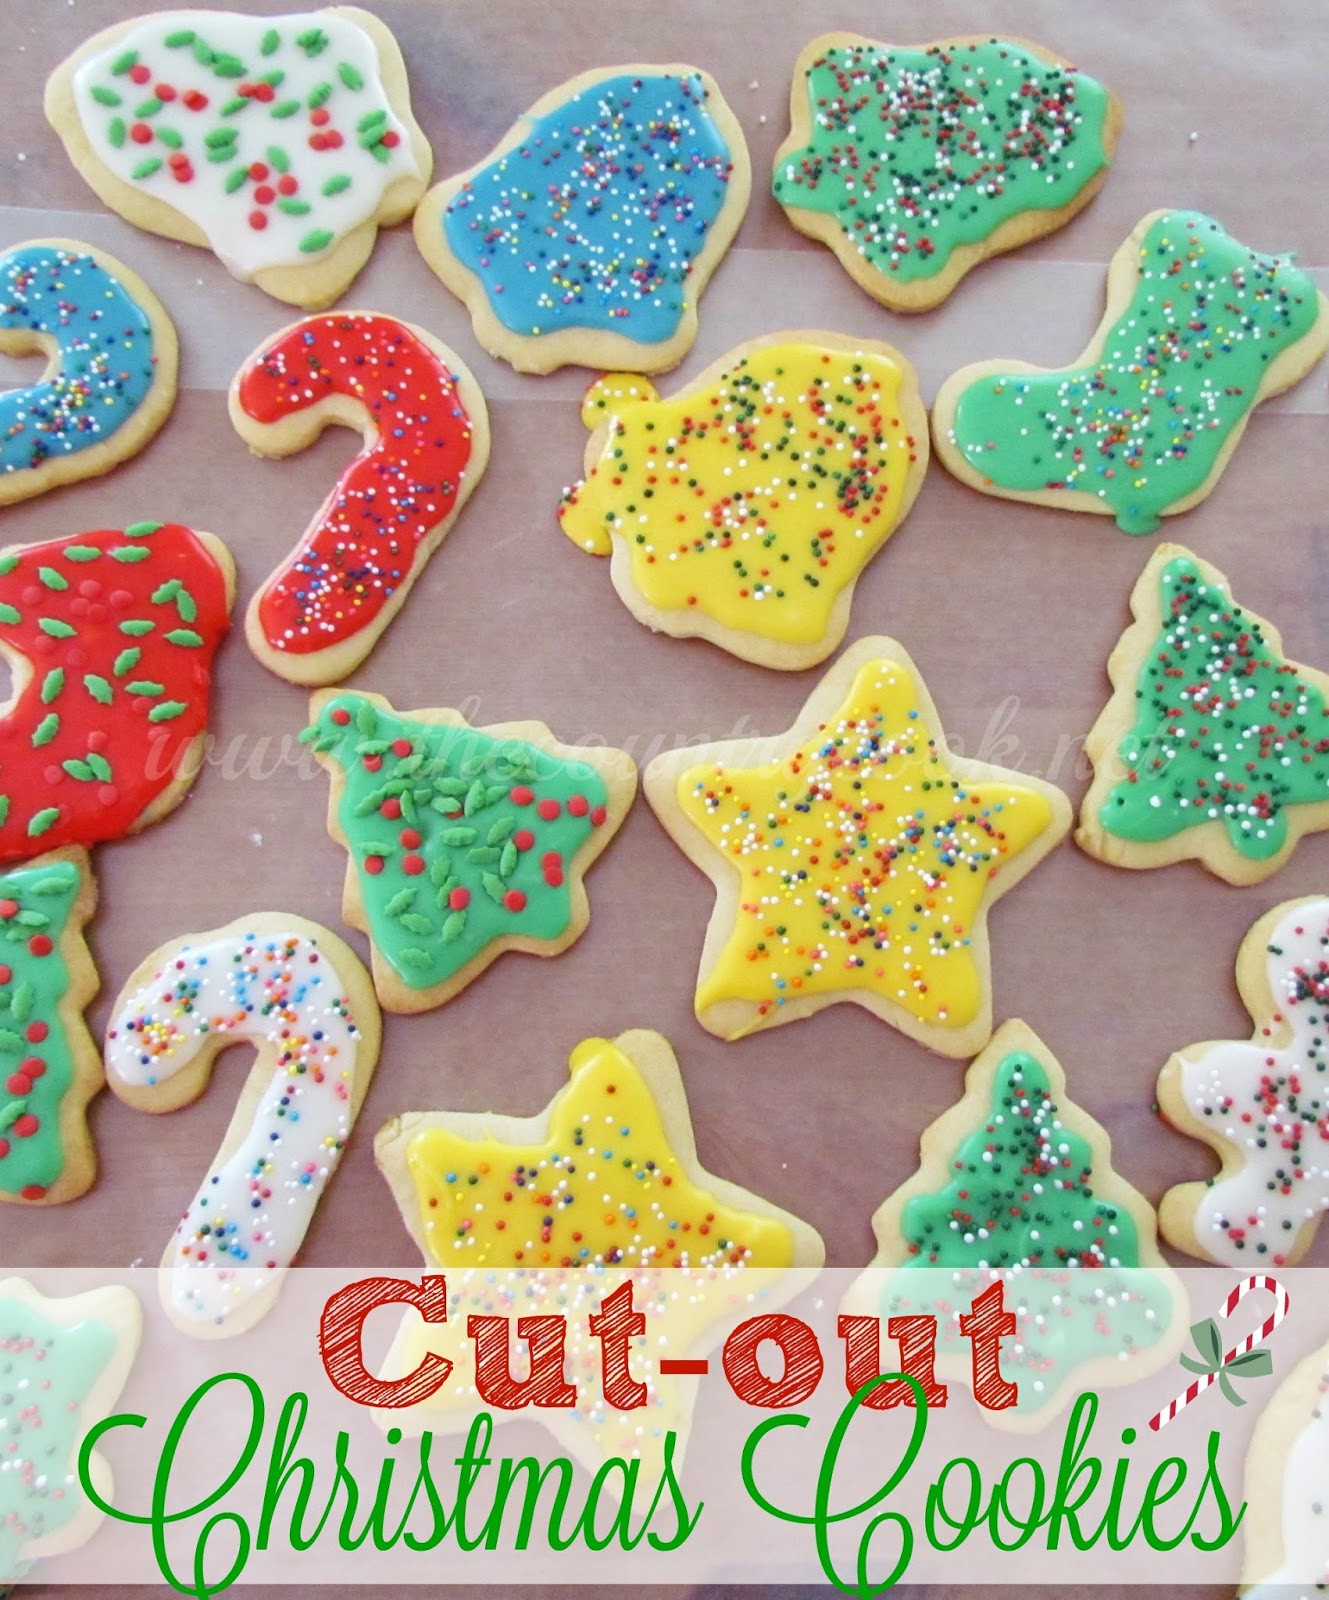 Christmas Cut Out Sugar Cookies
 Cut Out Sugar Cookies The Country Cook